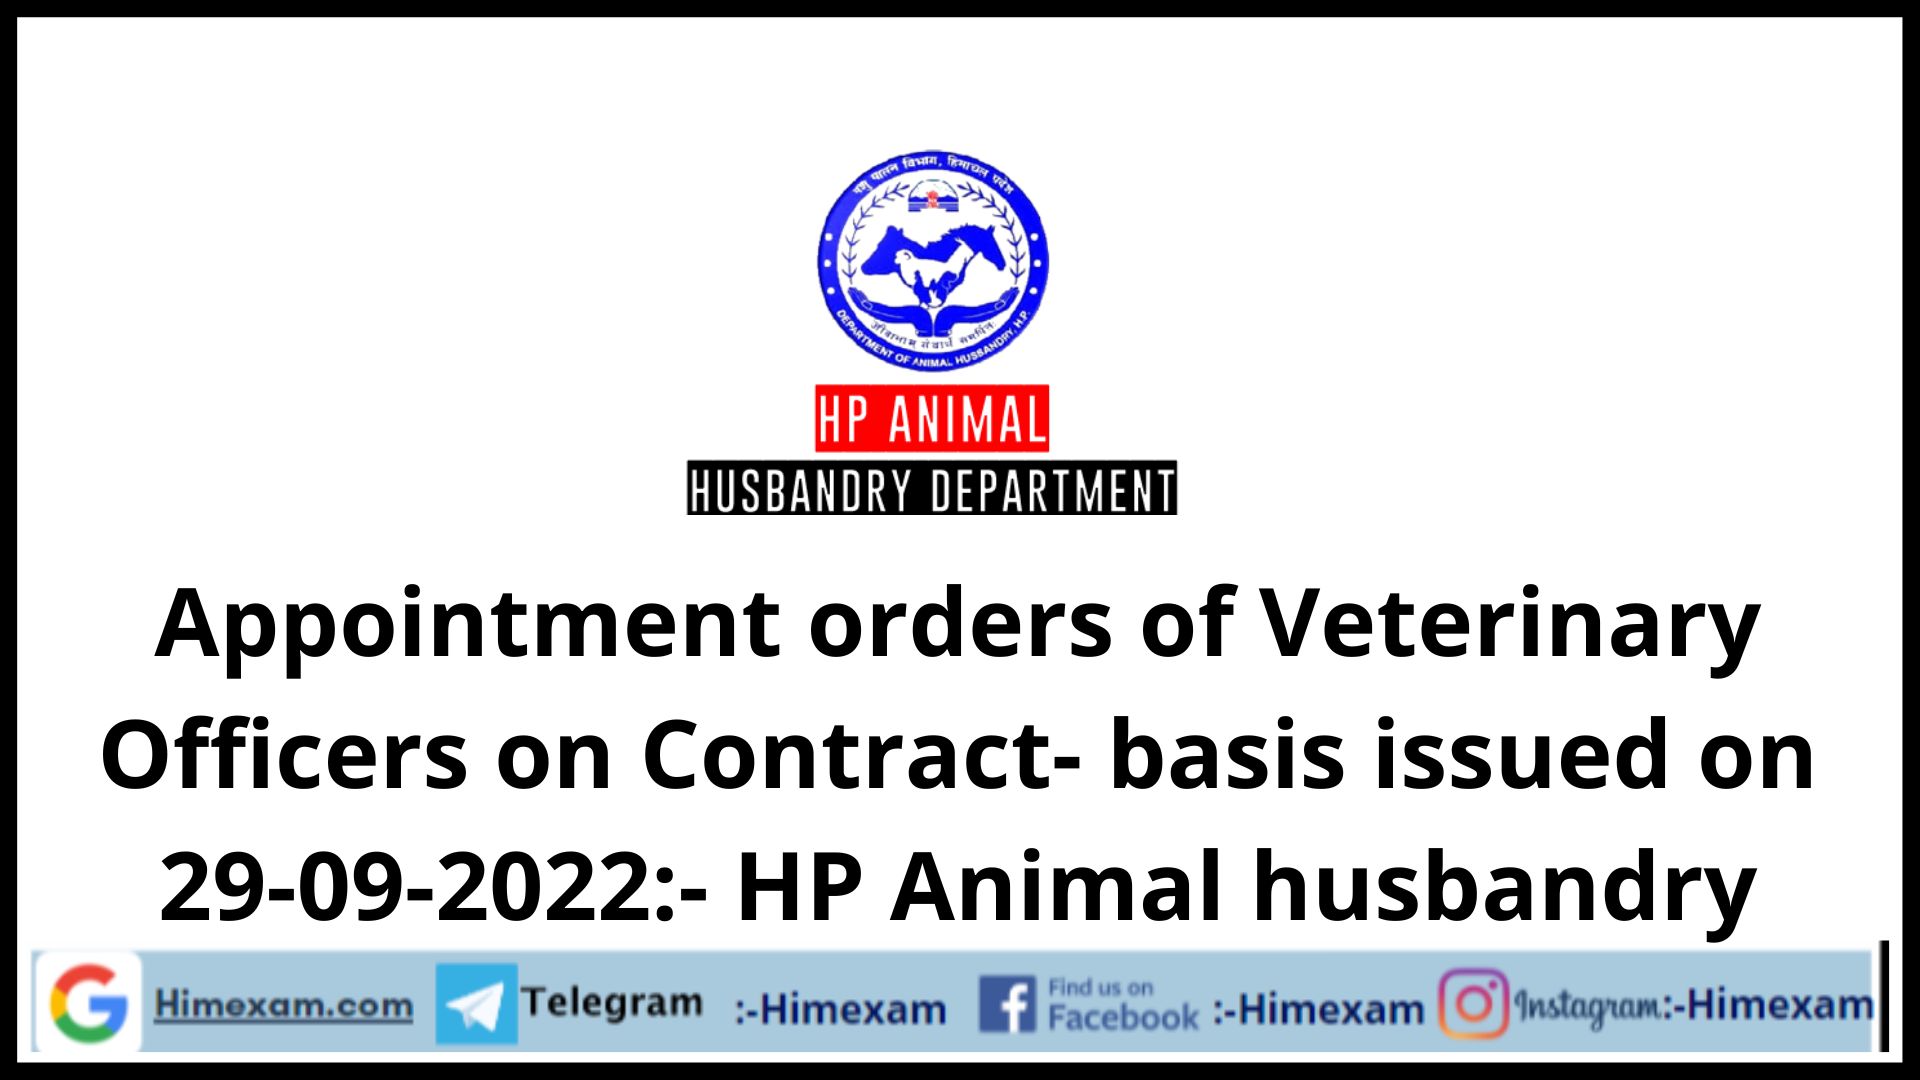 Appointment orders of Veterinary Officers on Contract- basis issued on  29-09-2022:- HP Animal husbandry